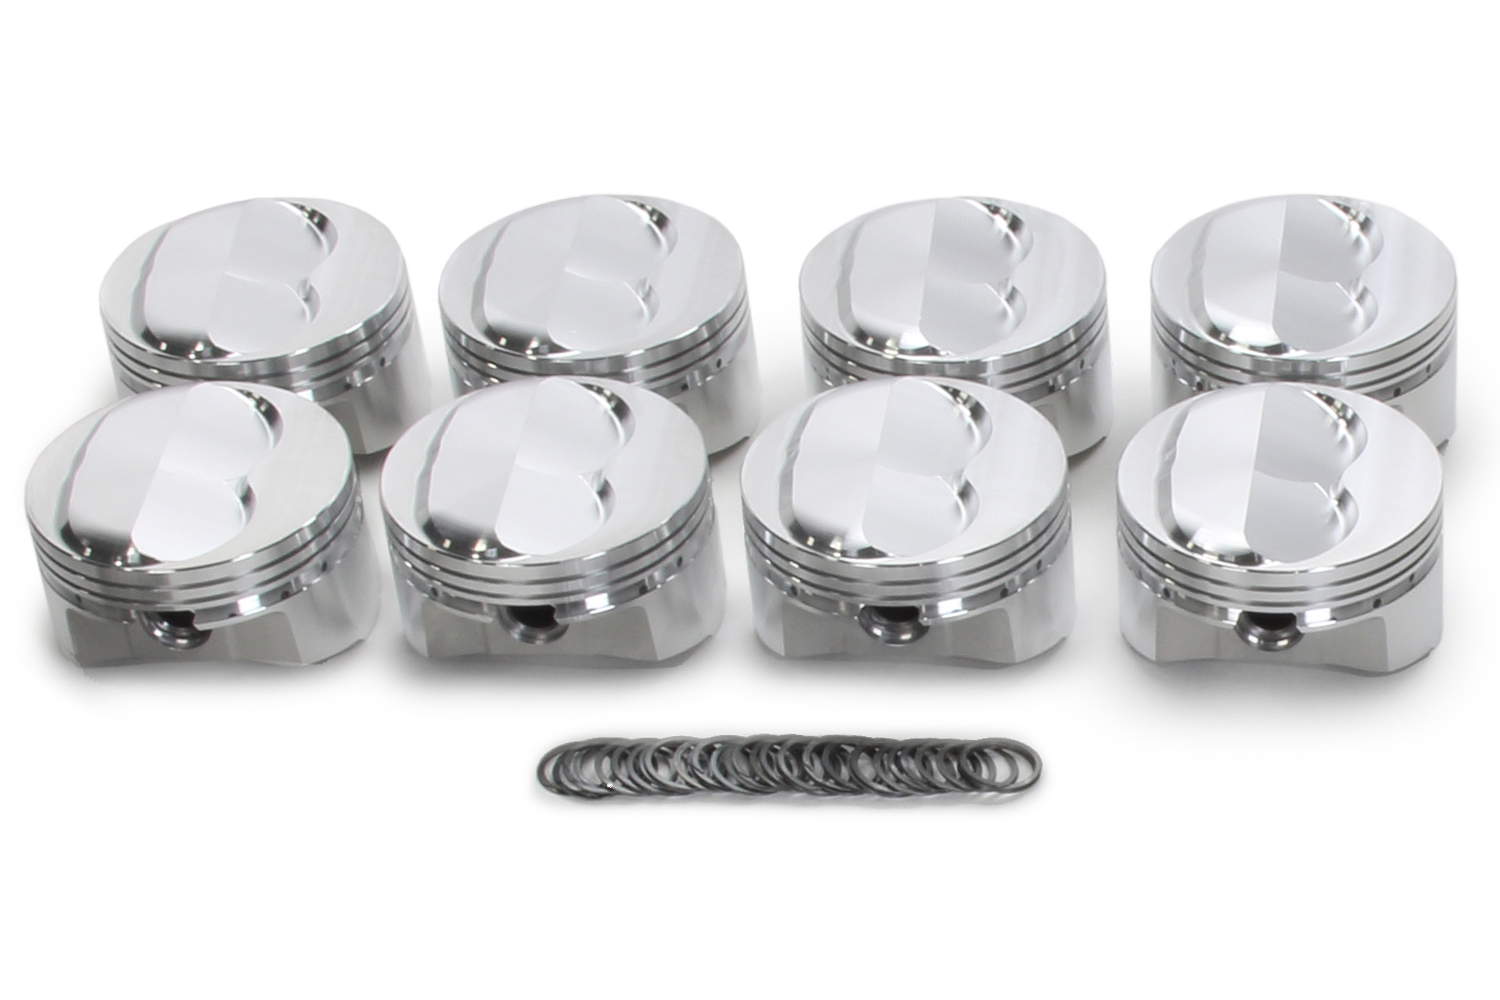 SRP Pistons 142025 Piston, 400 Dome, Forged, 4.165 in Bore, 1/16 x 1/16 x 3/16 in Ring Grooves, Plus 4.00 cc, Small Block Chevy, Set of 8